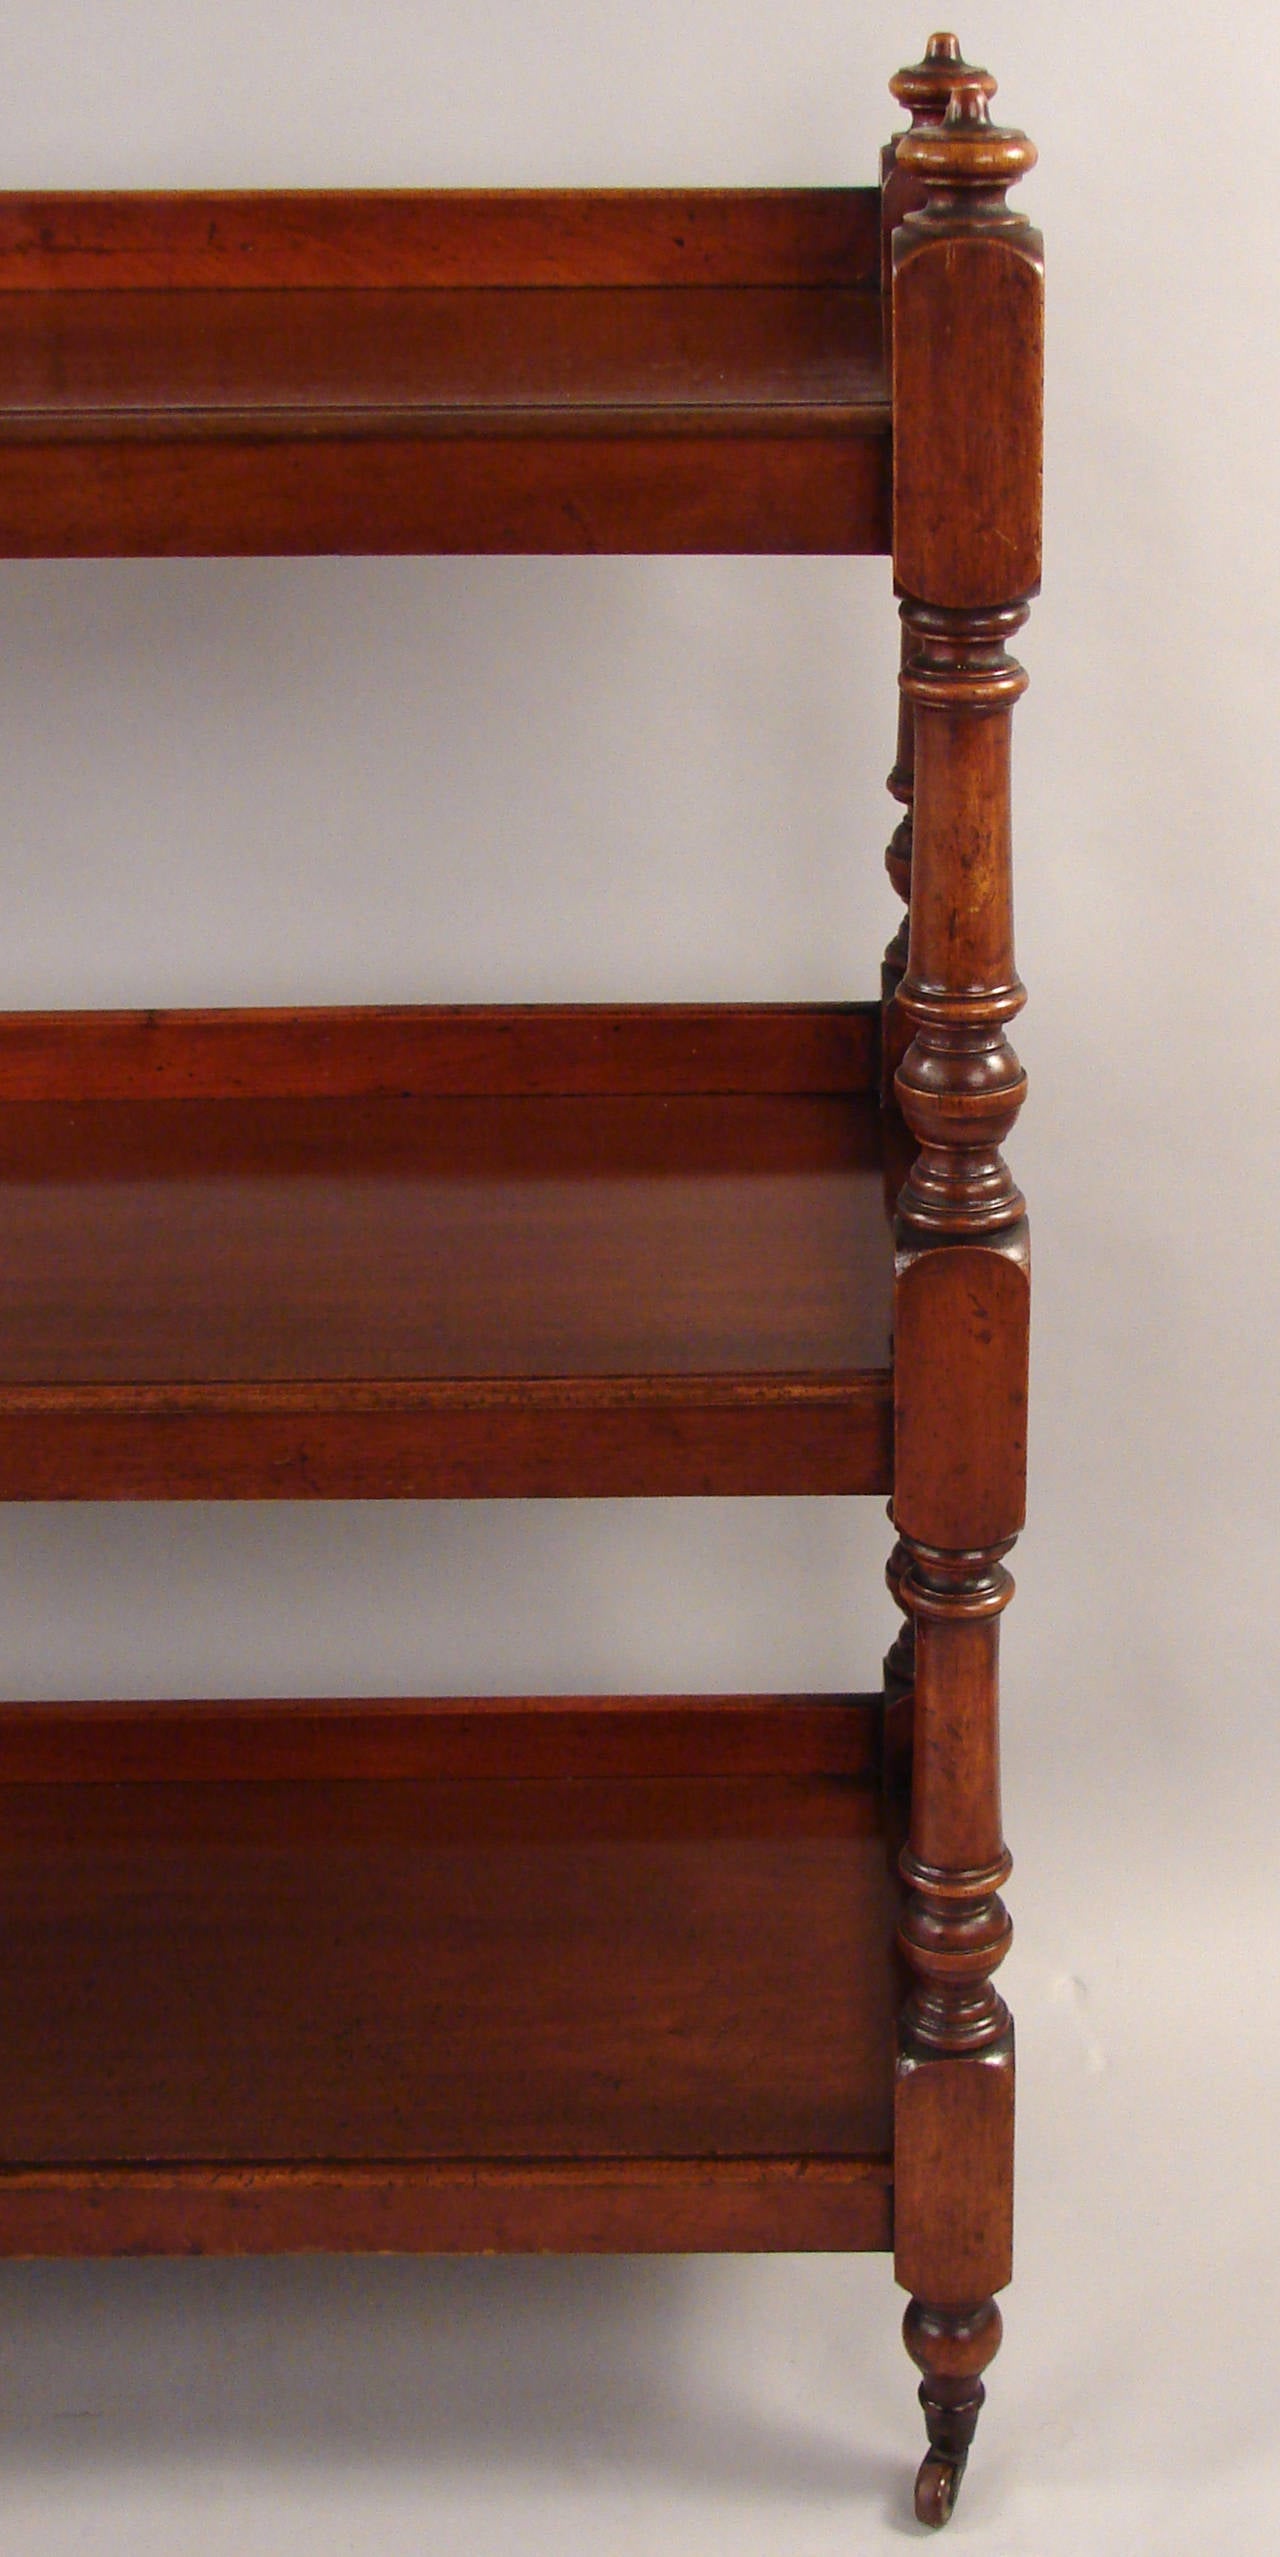 An English mahogany three-tier server or ètagerè, the top shelf with four finials at the corners, each shelf with a raised edge and turned standards ending in blocks, supported on similarly turned legs with porcelain casters.